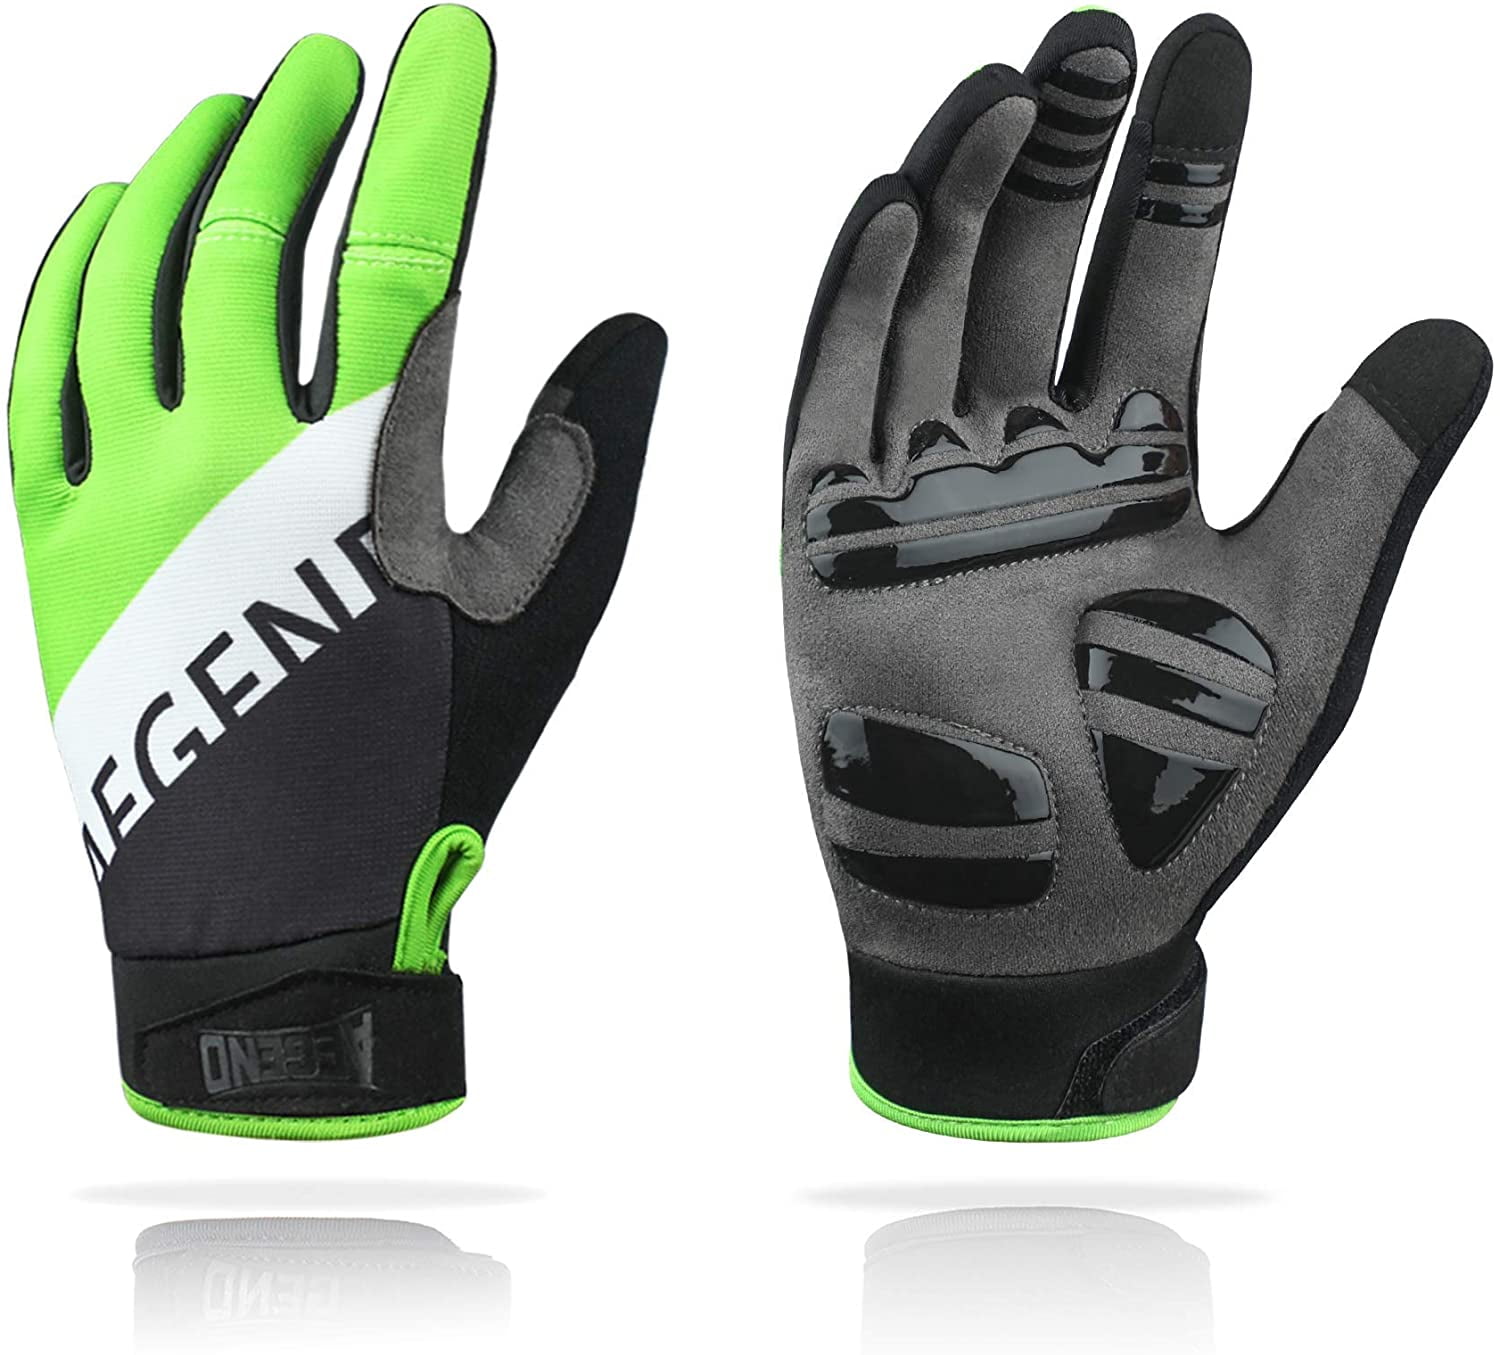 Full-Finger Racing Motorcycle Cycling Gloves MTB Bike Screen-Touch Gloves Tool 